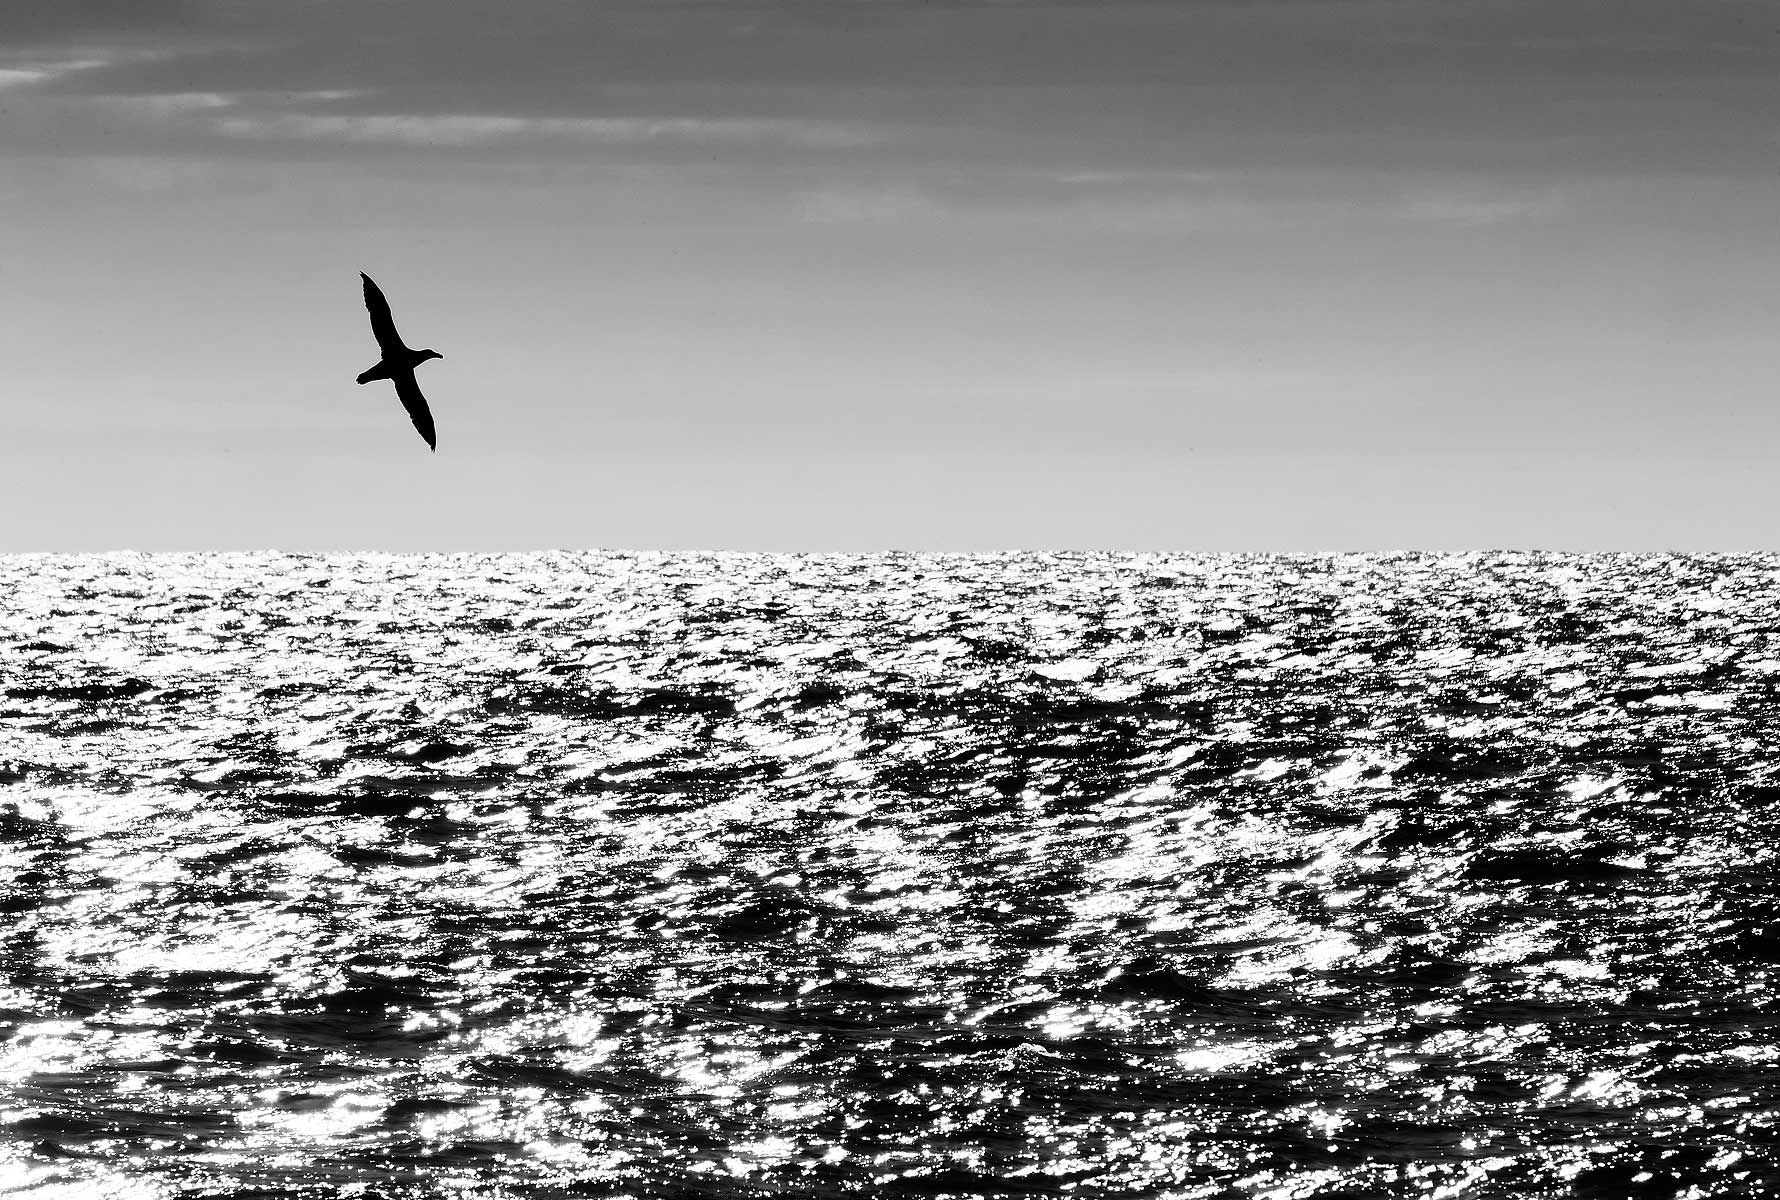 Gaint-Southern-Petrel-flying-above-the-waves-silhouette_B&W_A3I4182-Scotia-Sea,-Southern-Ocean.jpg